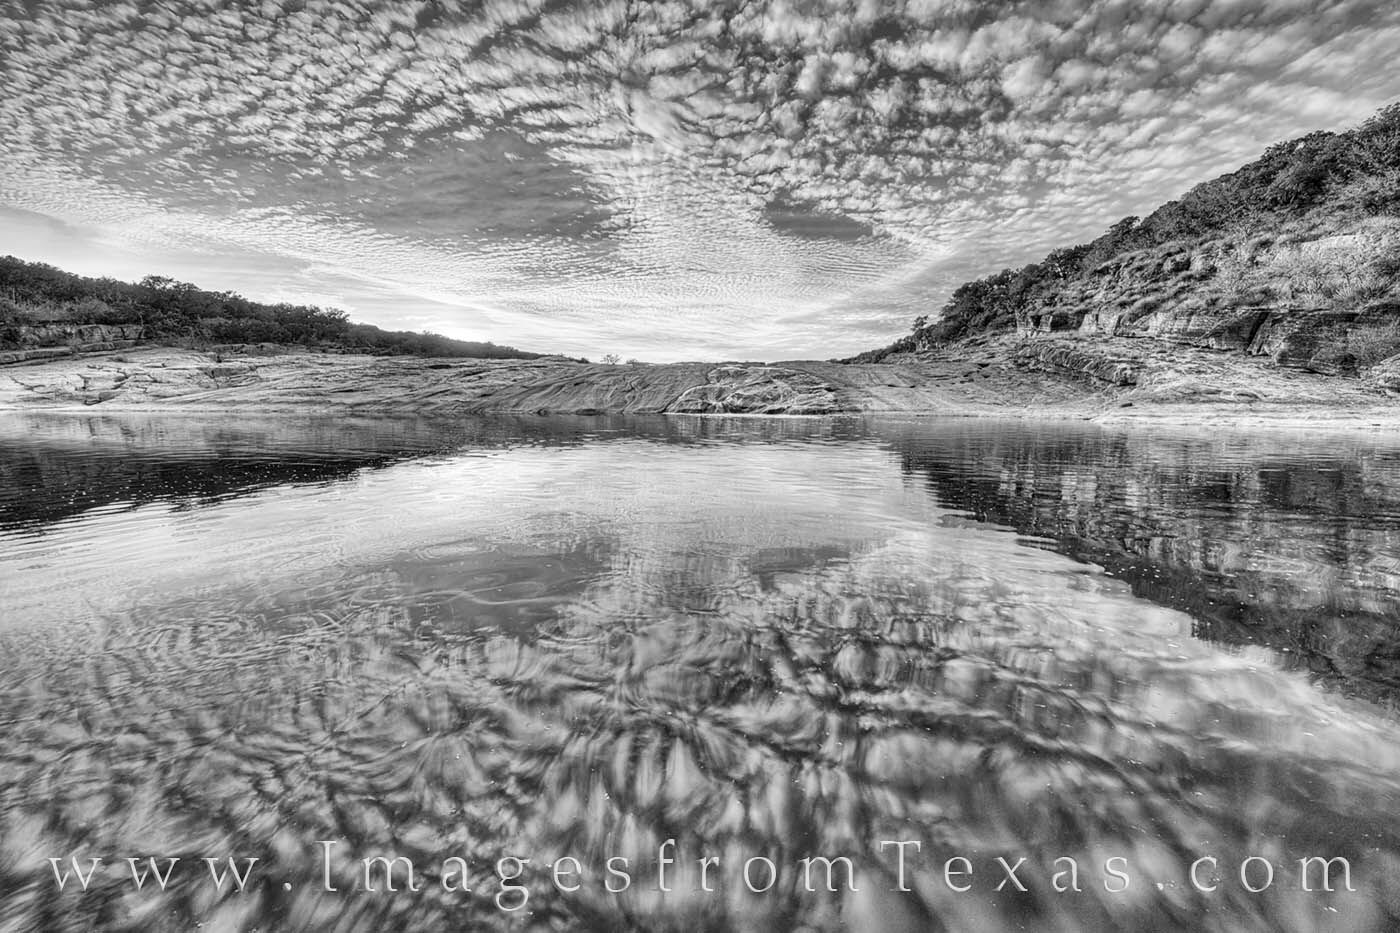 A pool in the cascades along the Pedernales River shows an amazing reflection of the evening sky. I liked the color version...